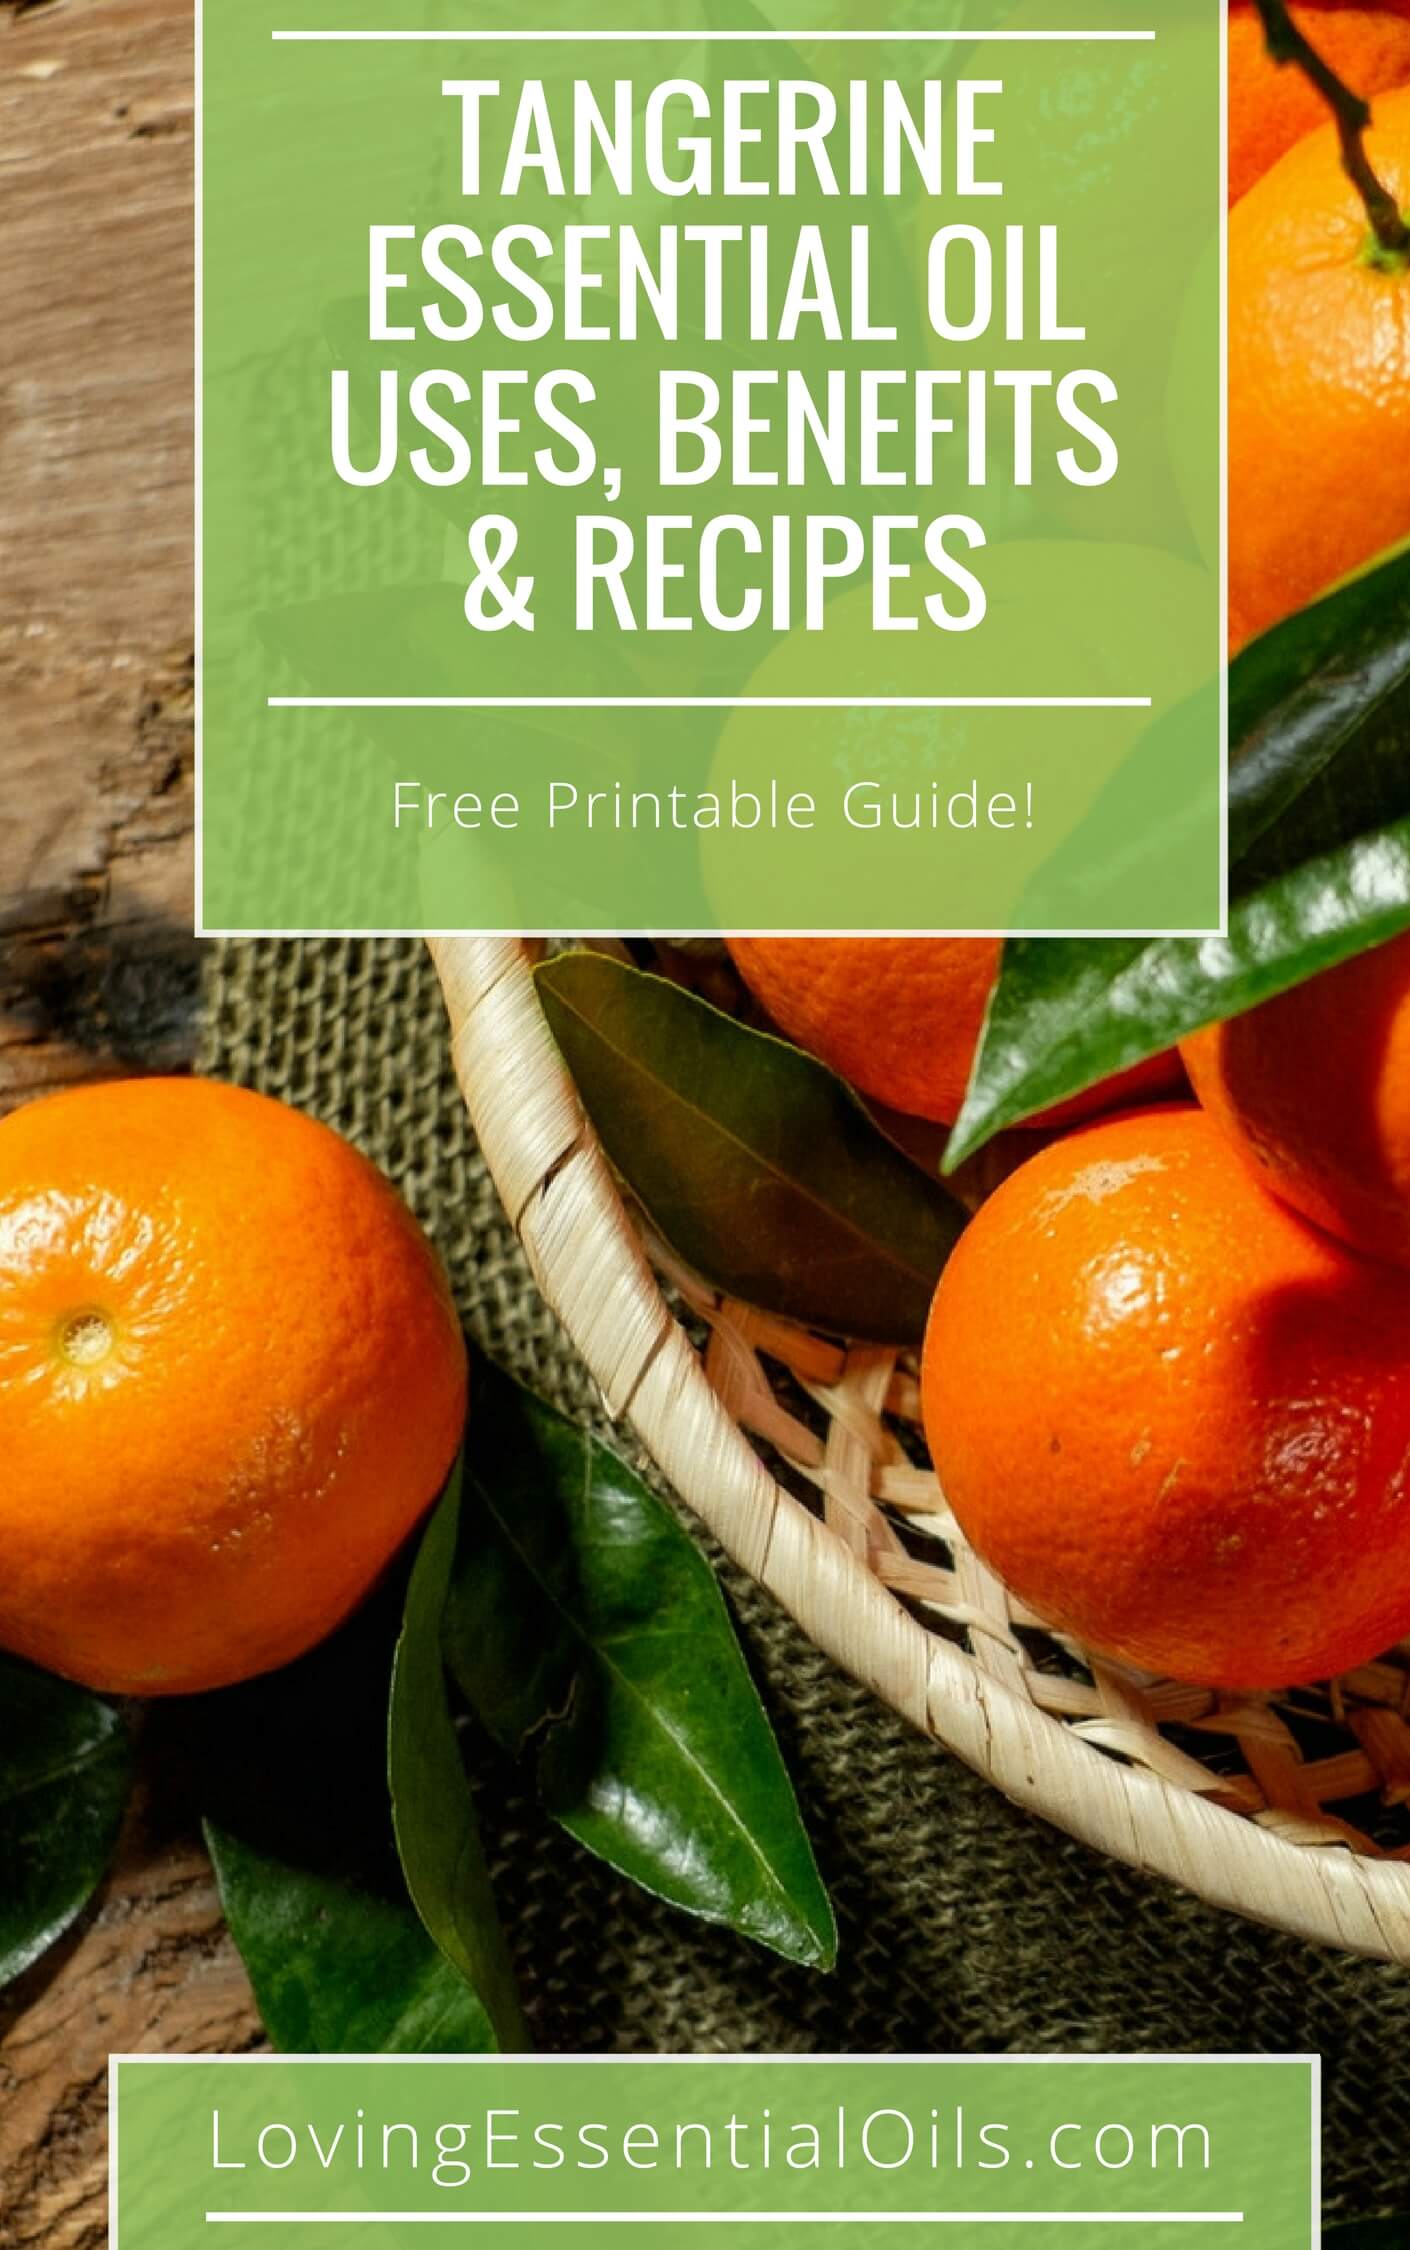 Tangerine Essential Oil Benefits and Uses Guide with Recipes by Loving Essential Oils